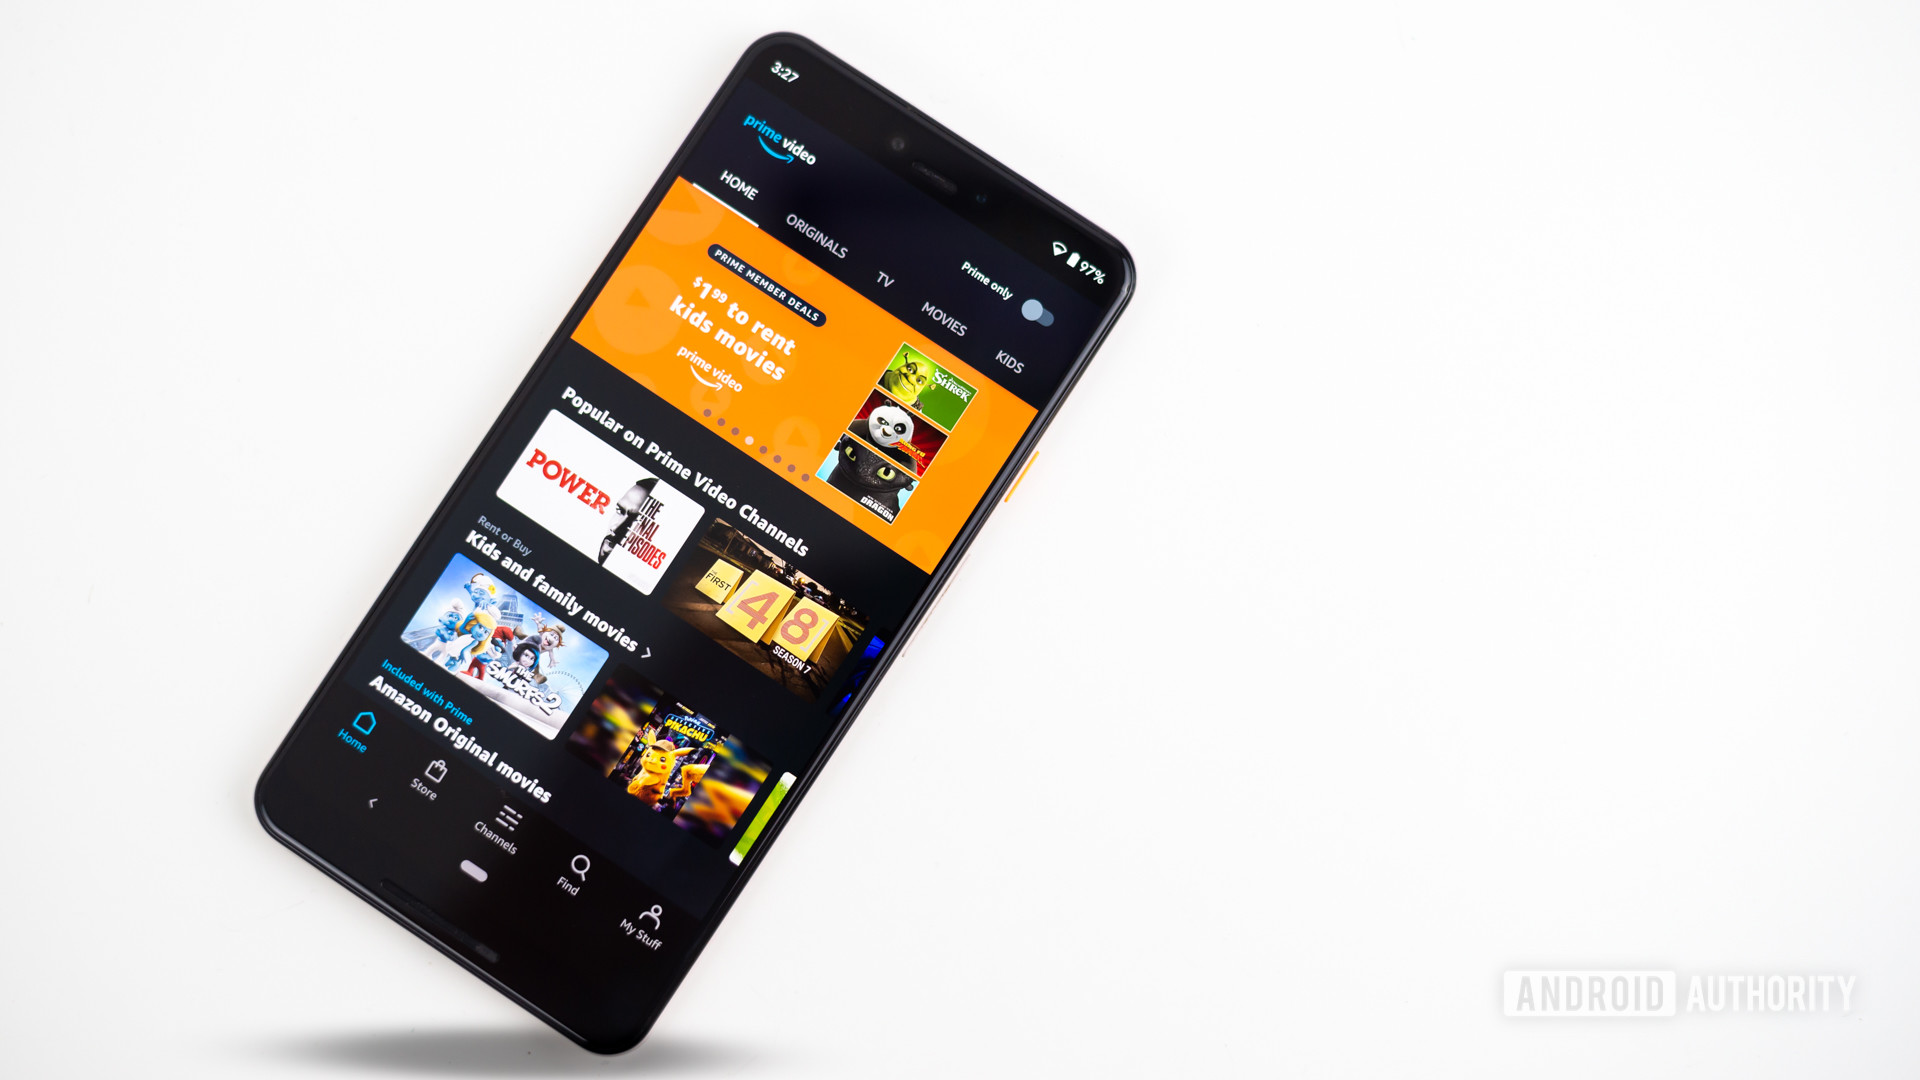 Amazon Prime video shown on smartphone featured image